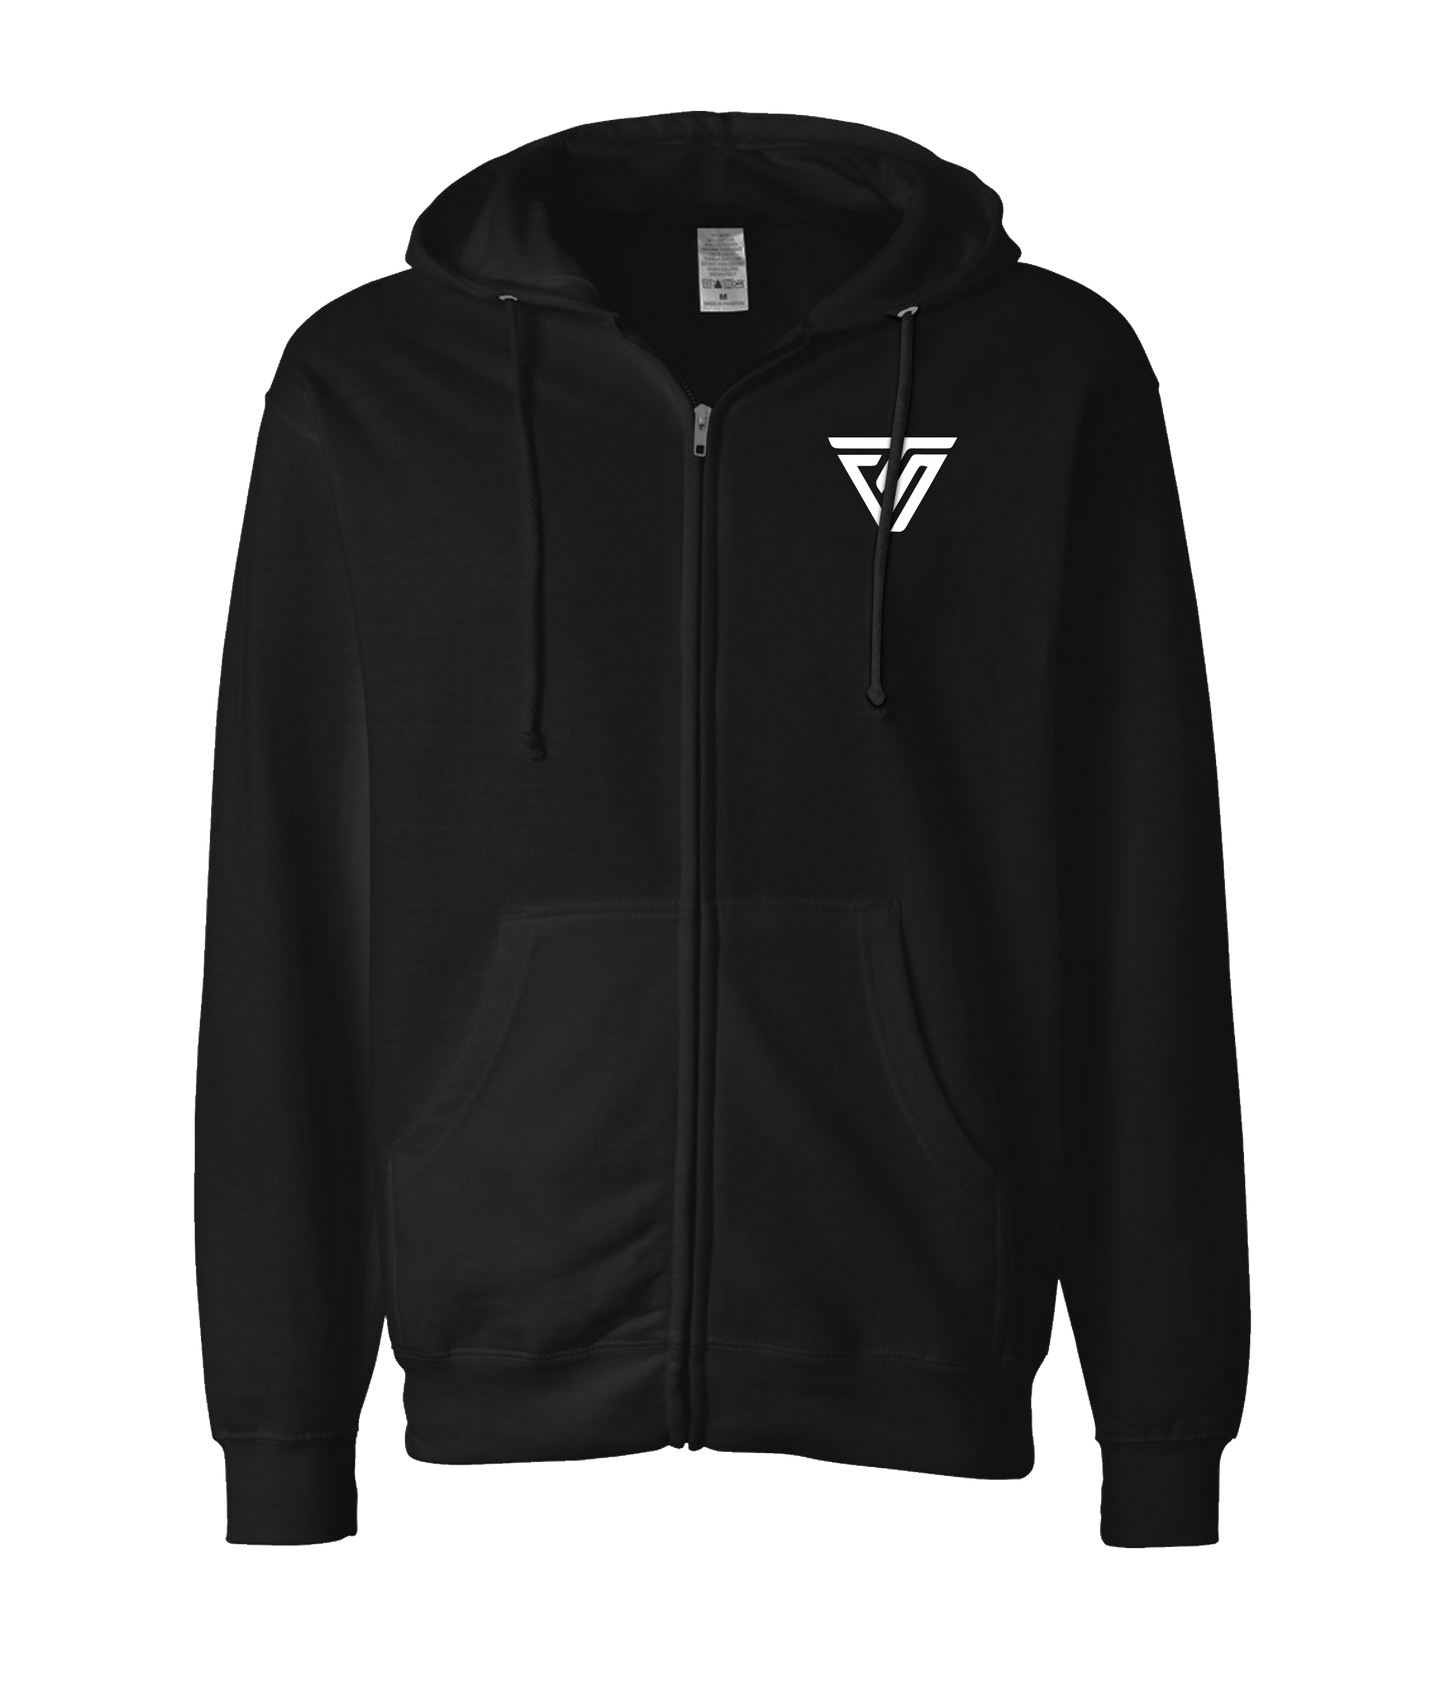 TheShift - Shift Front To Back - White Zip Up Hoodie